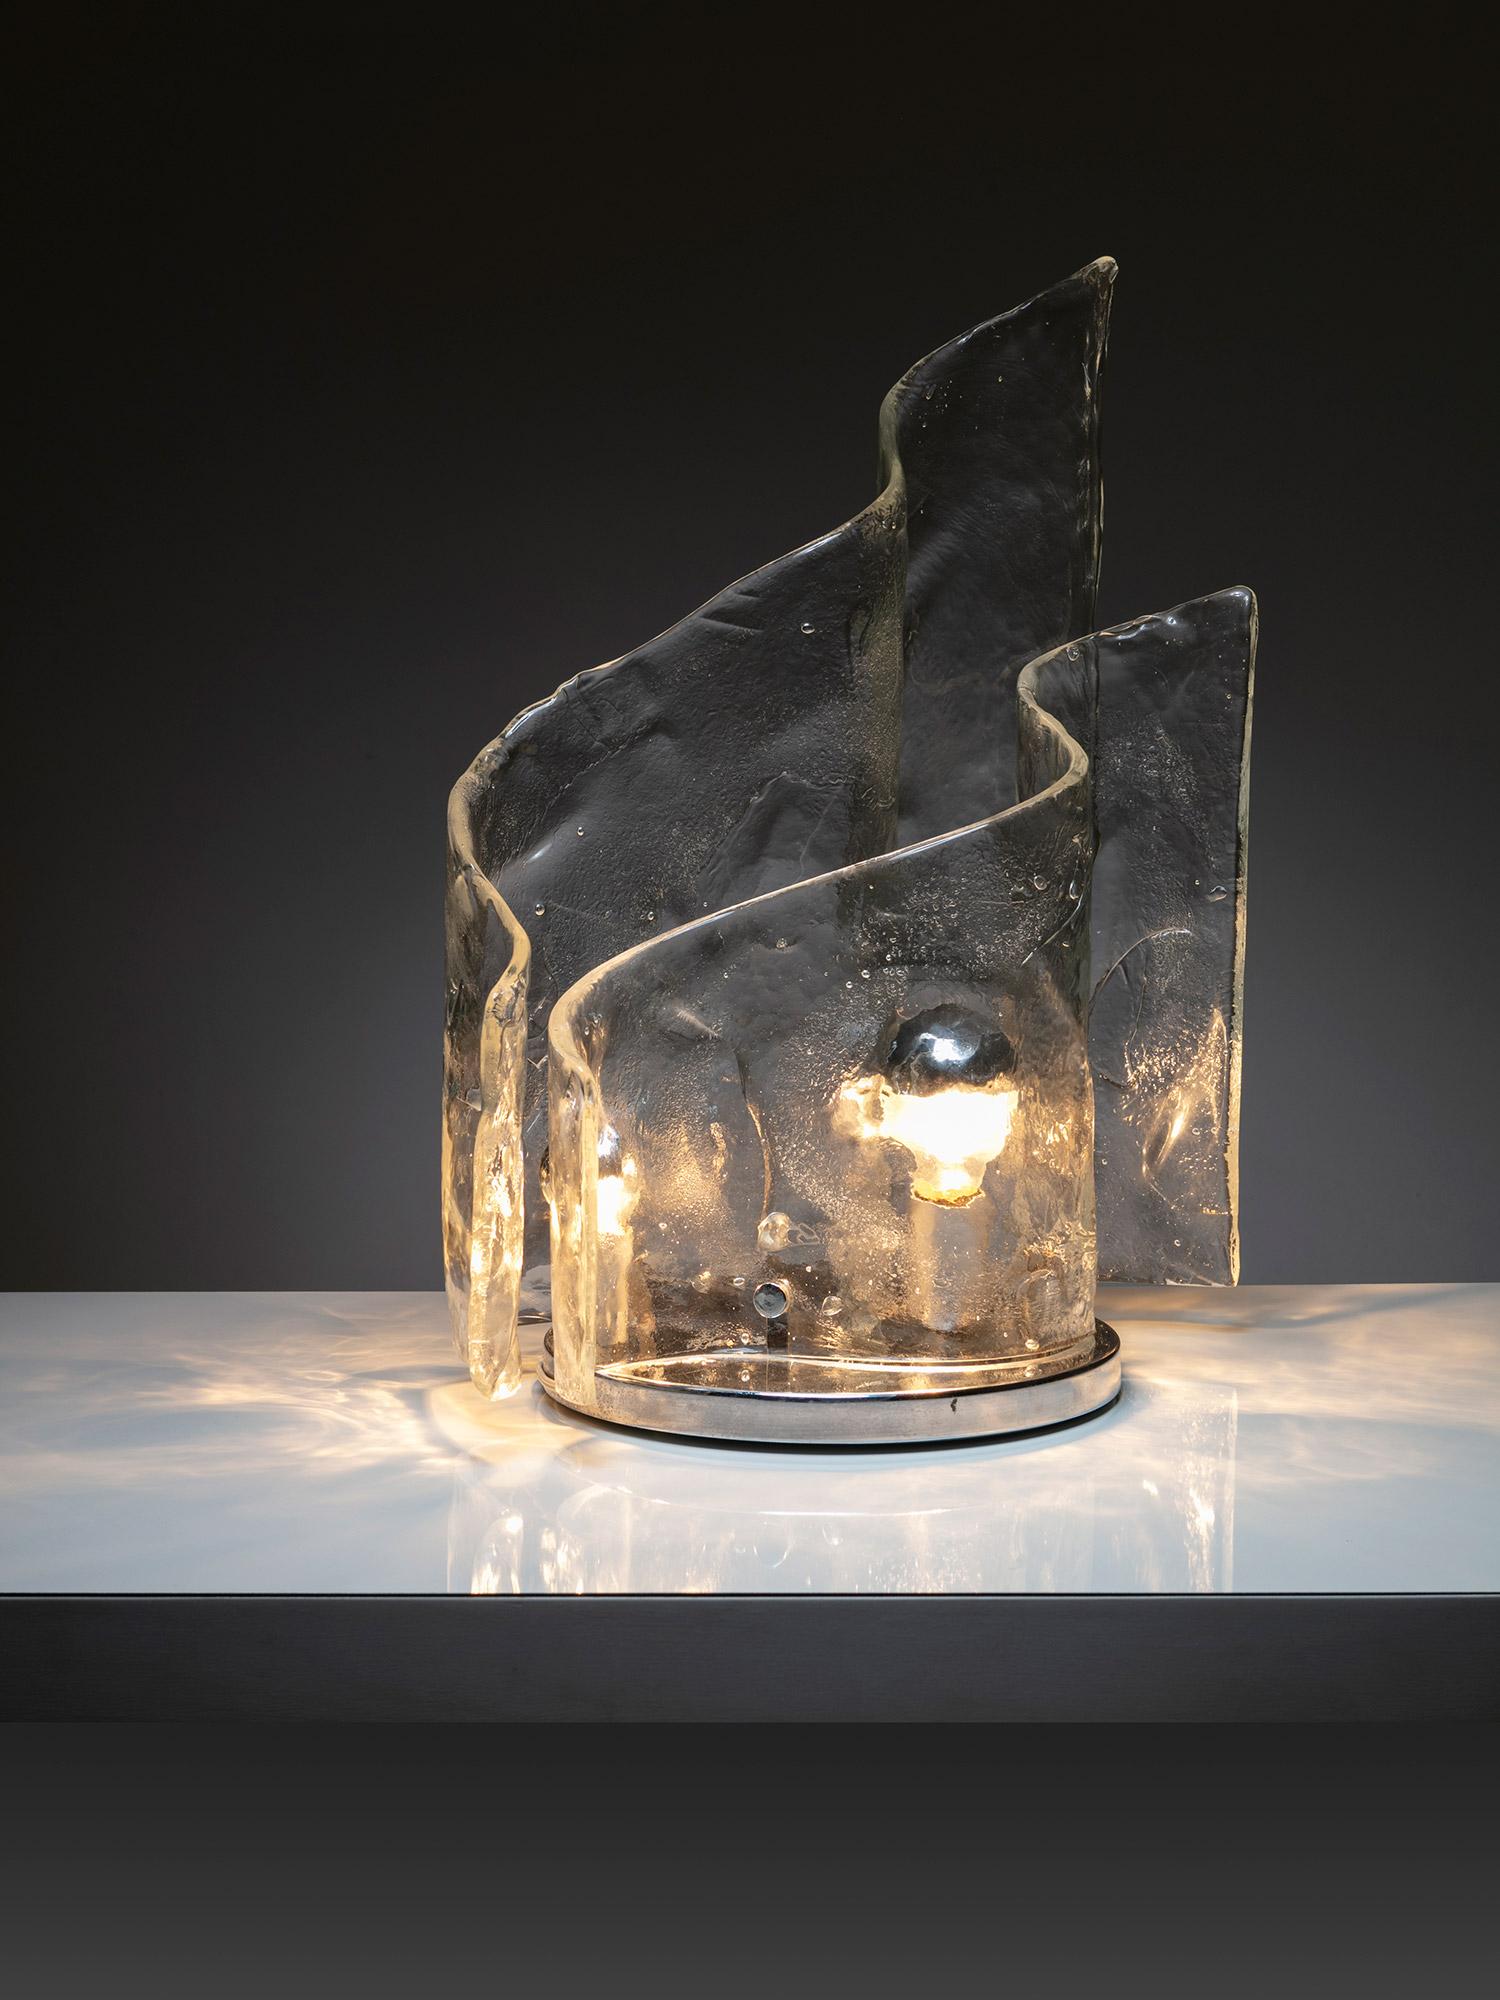 Table lamp by Carlo Nason for Mazzega.
Two large Murano glass waves, creating a light cloud.